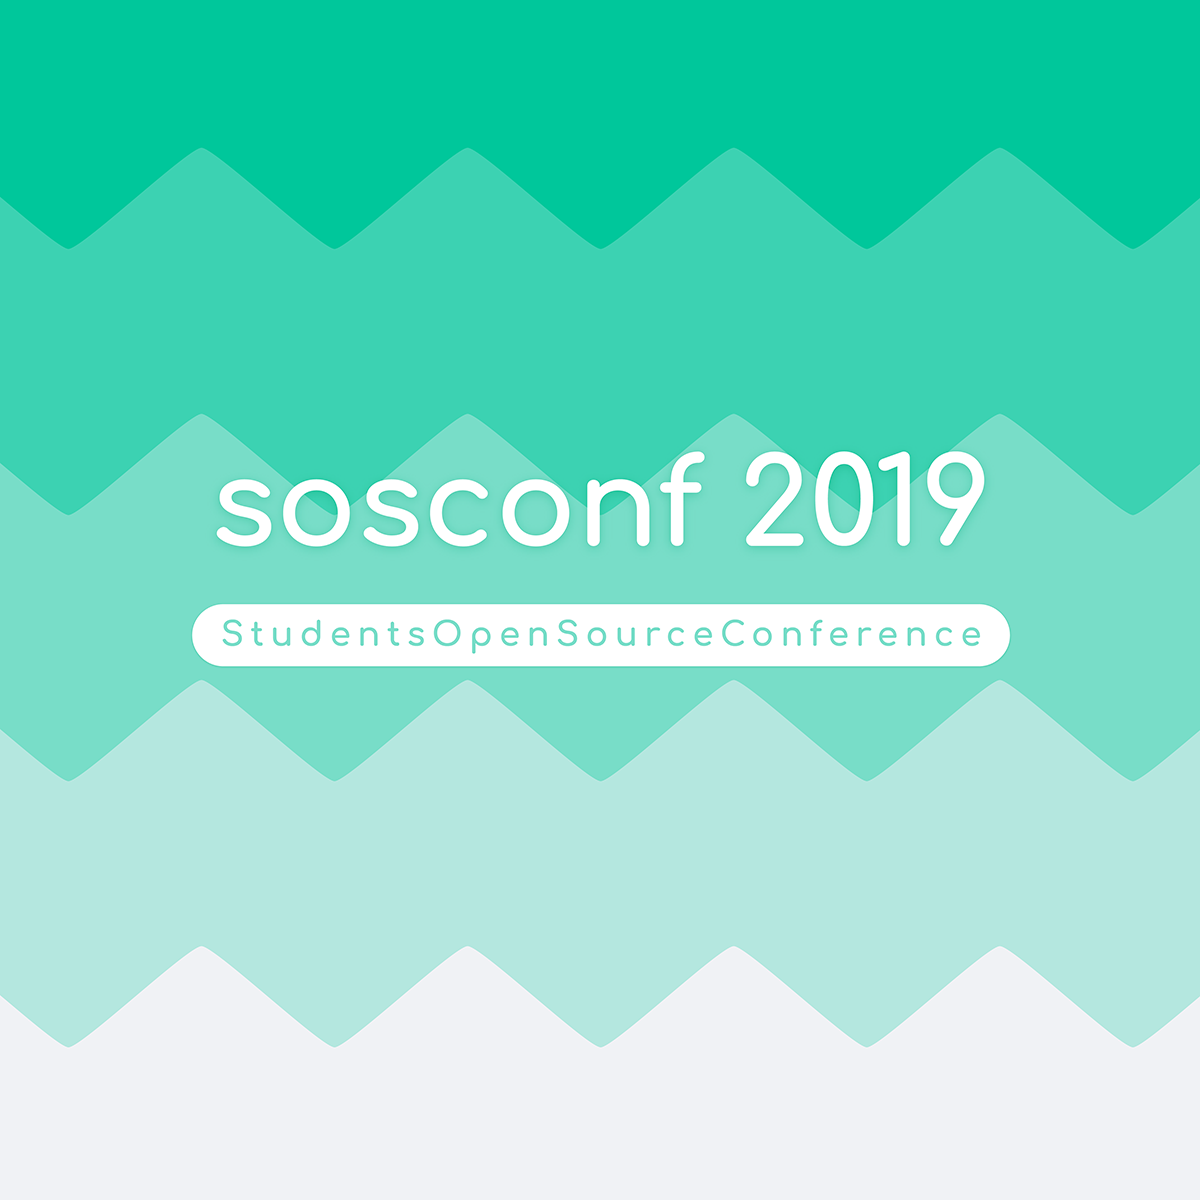 Important Announcement About Cancellation of sosconf 2019